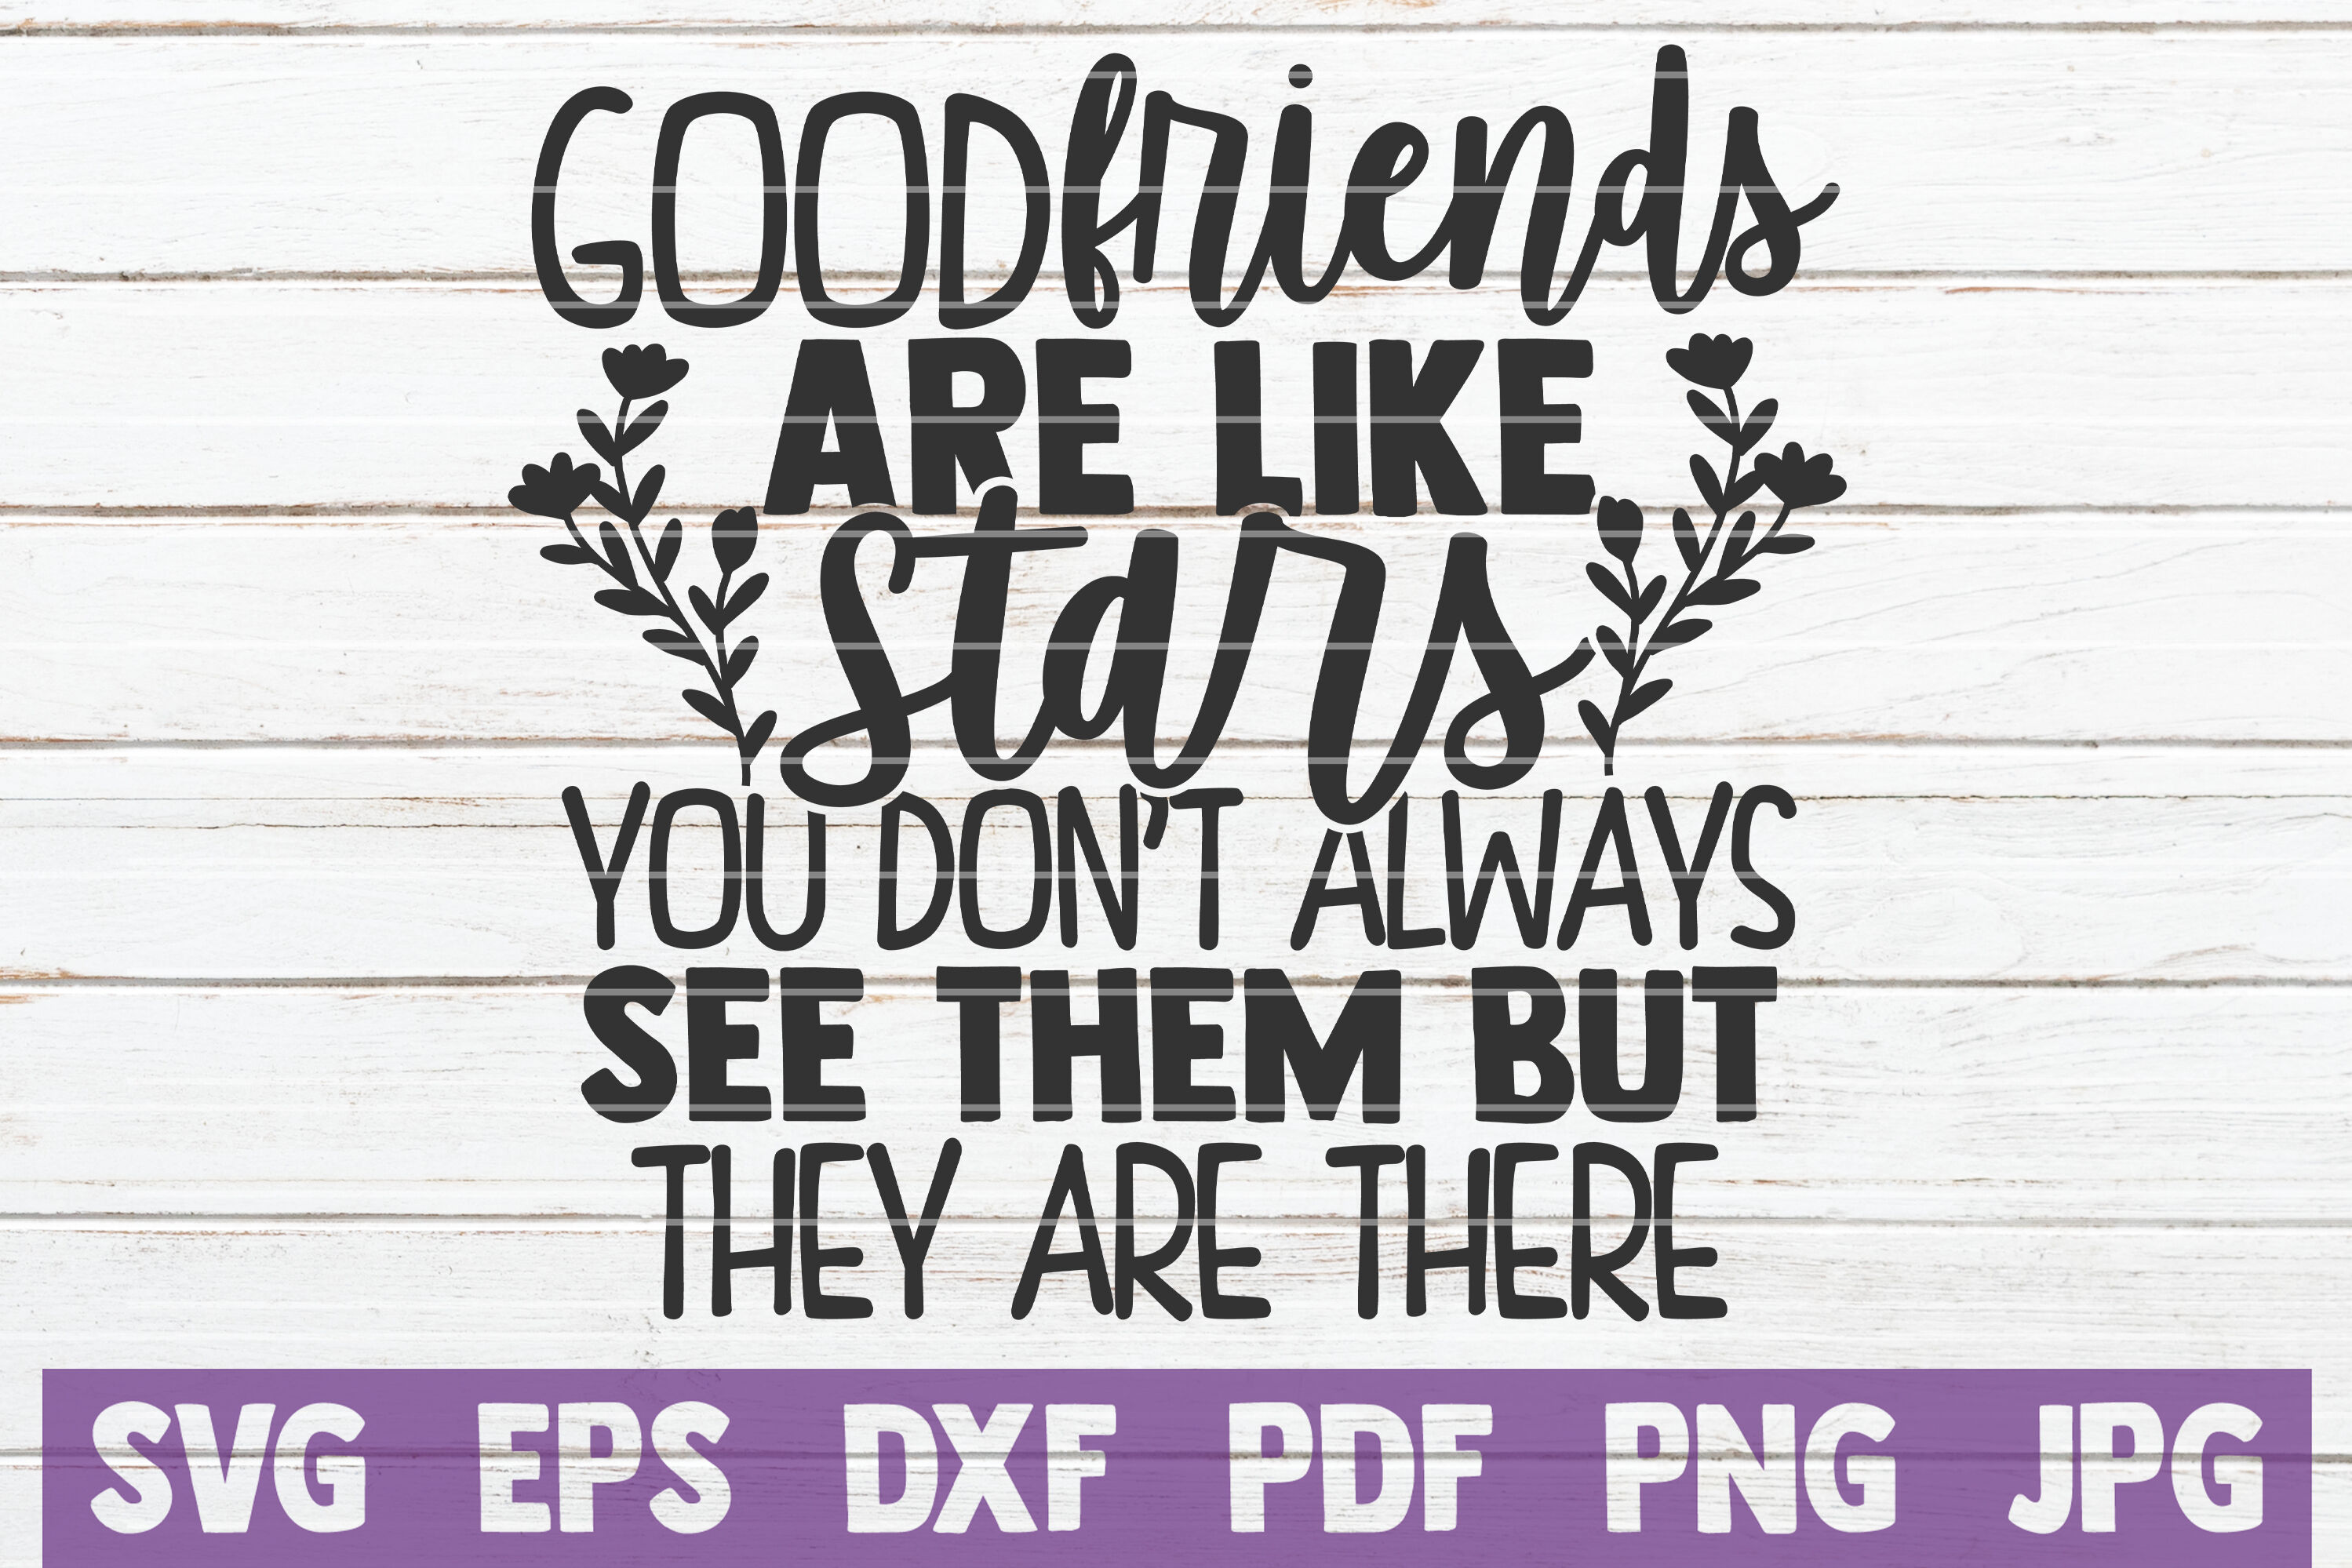 You Don/'t Always See Them but You Know They/'re Always There DXF PNG Good Friends Are Like Stars jpg circut Silhouette cut file SVG